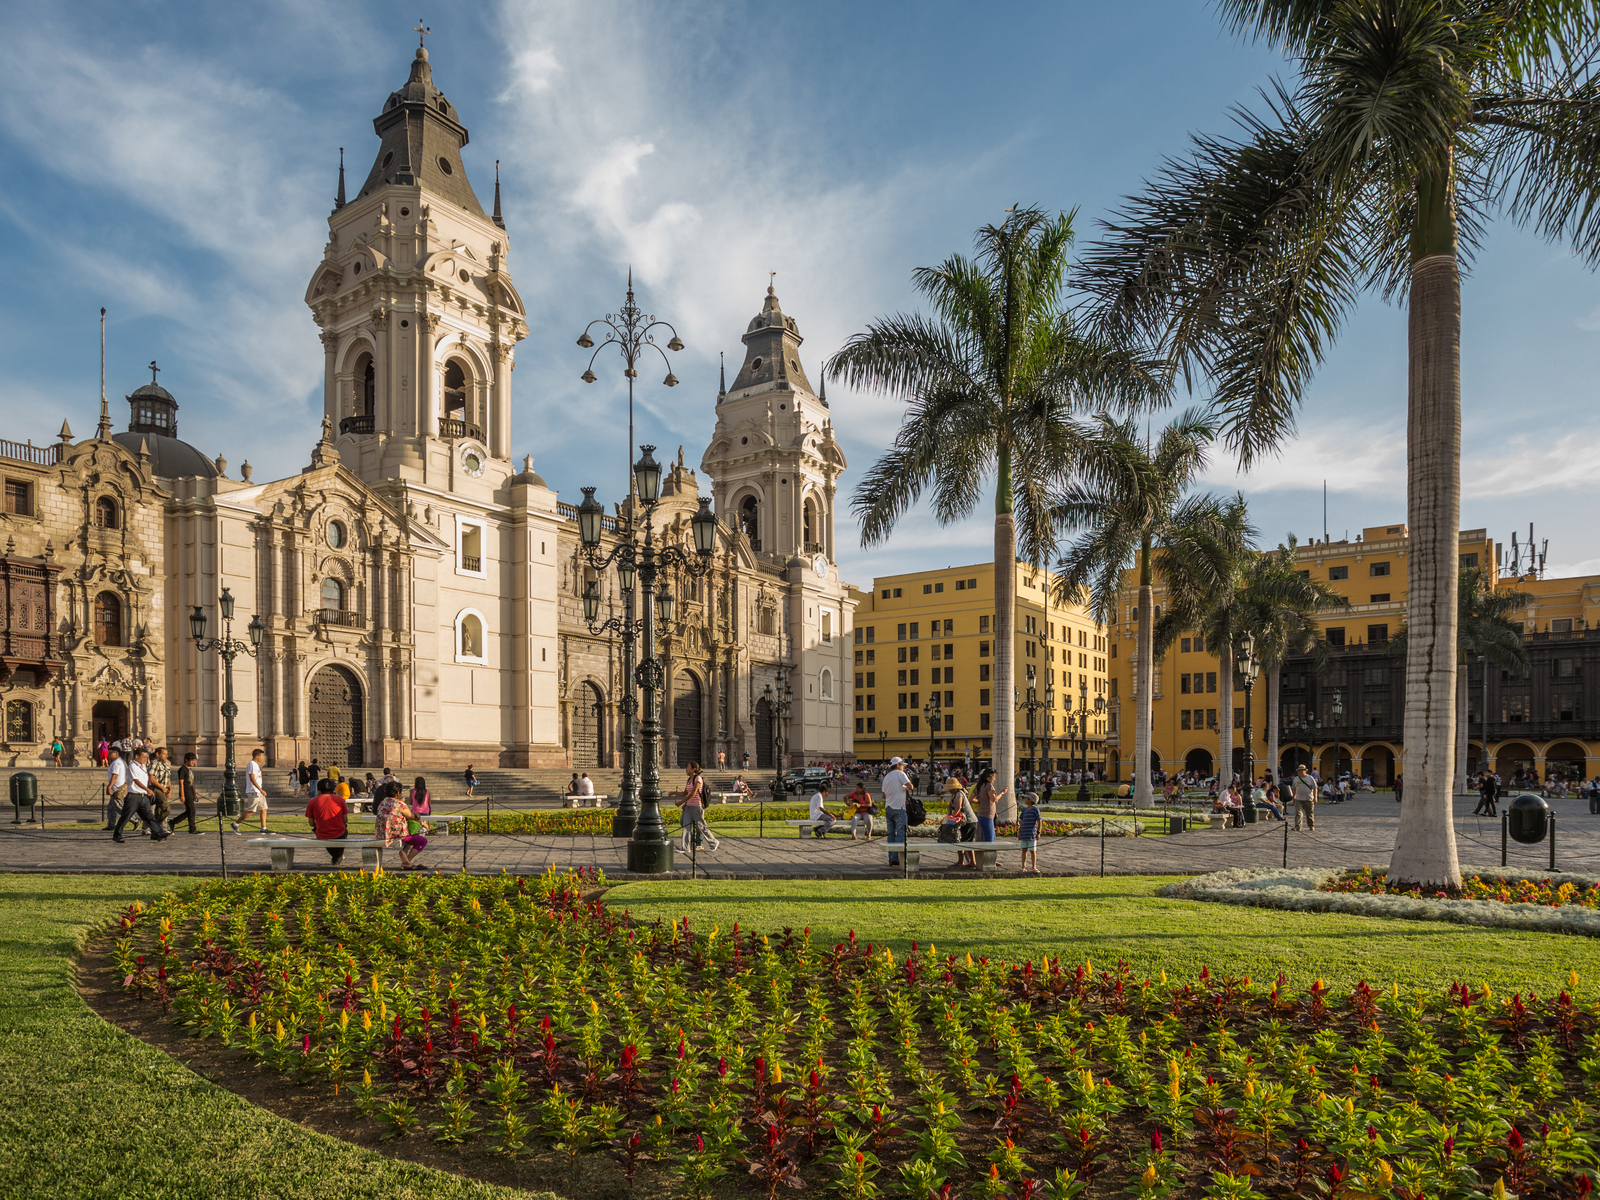 For a post titled Is Peru Safe, the cathedral is pictured from the middle of the park